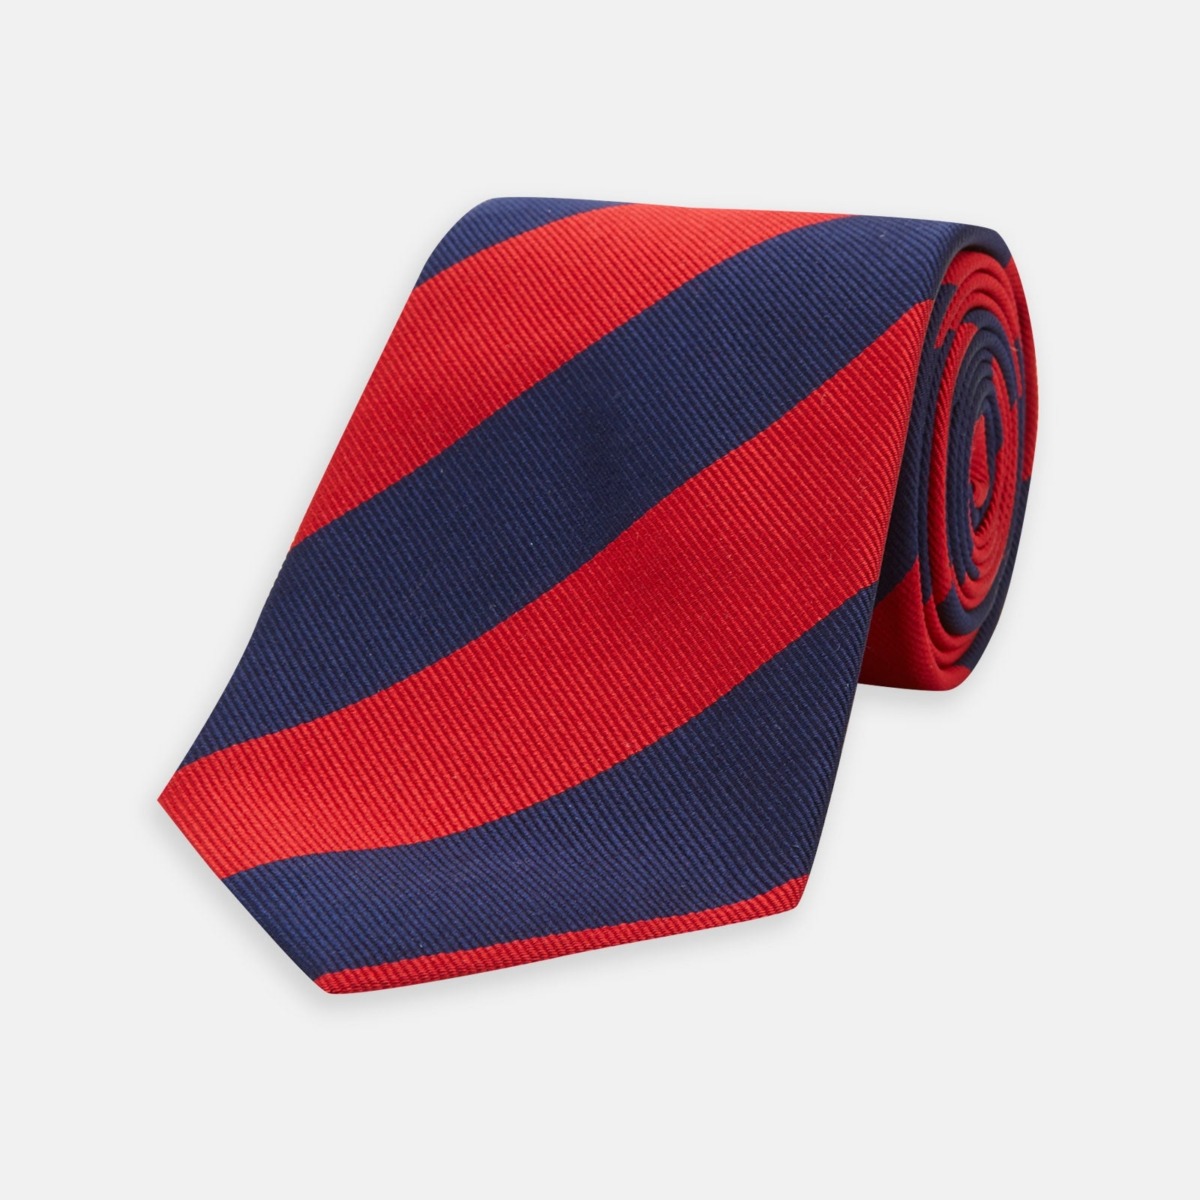 Turnbull & Asser - Red Gent Tie Turnbull And Asser GOOFASH